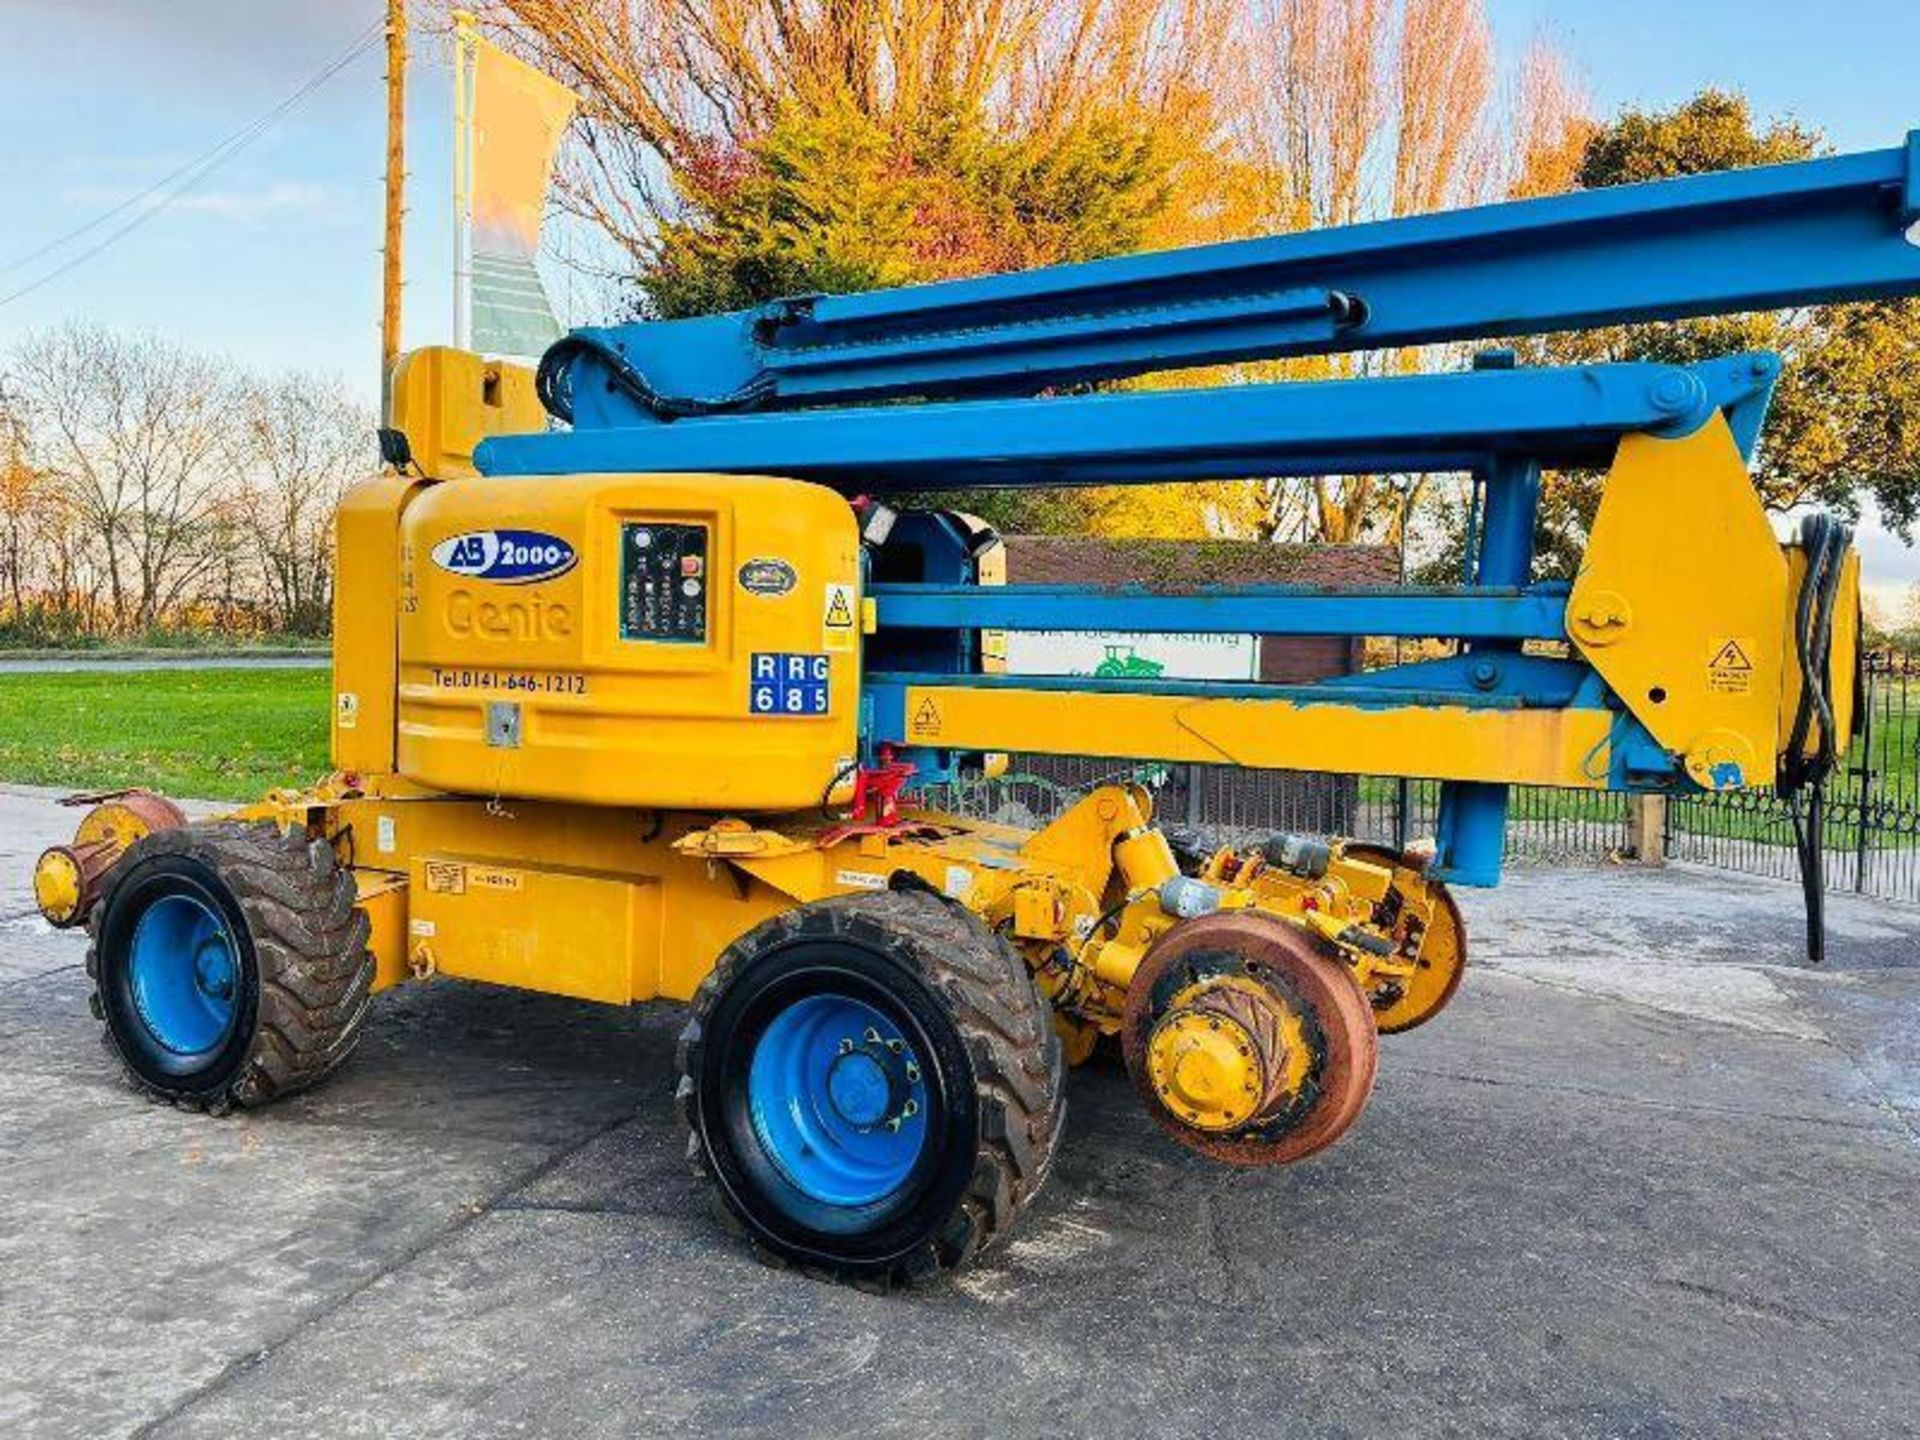 GENIE Z-60/34 4WD ARTICULATED RAIL ROAD BOOM LIFT * 20.3 METER REACH *. - Image 2 of 15